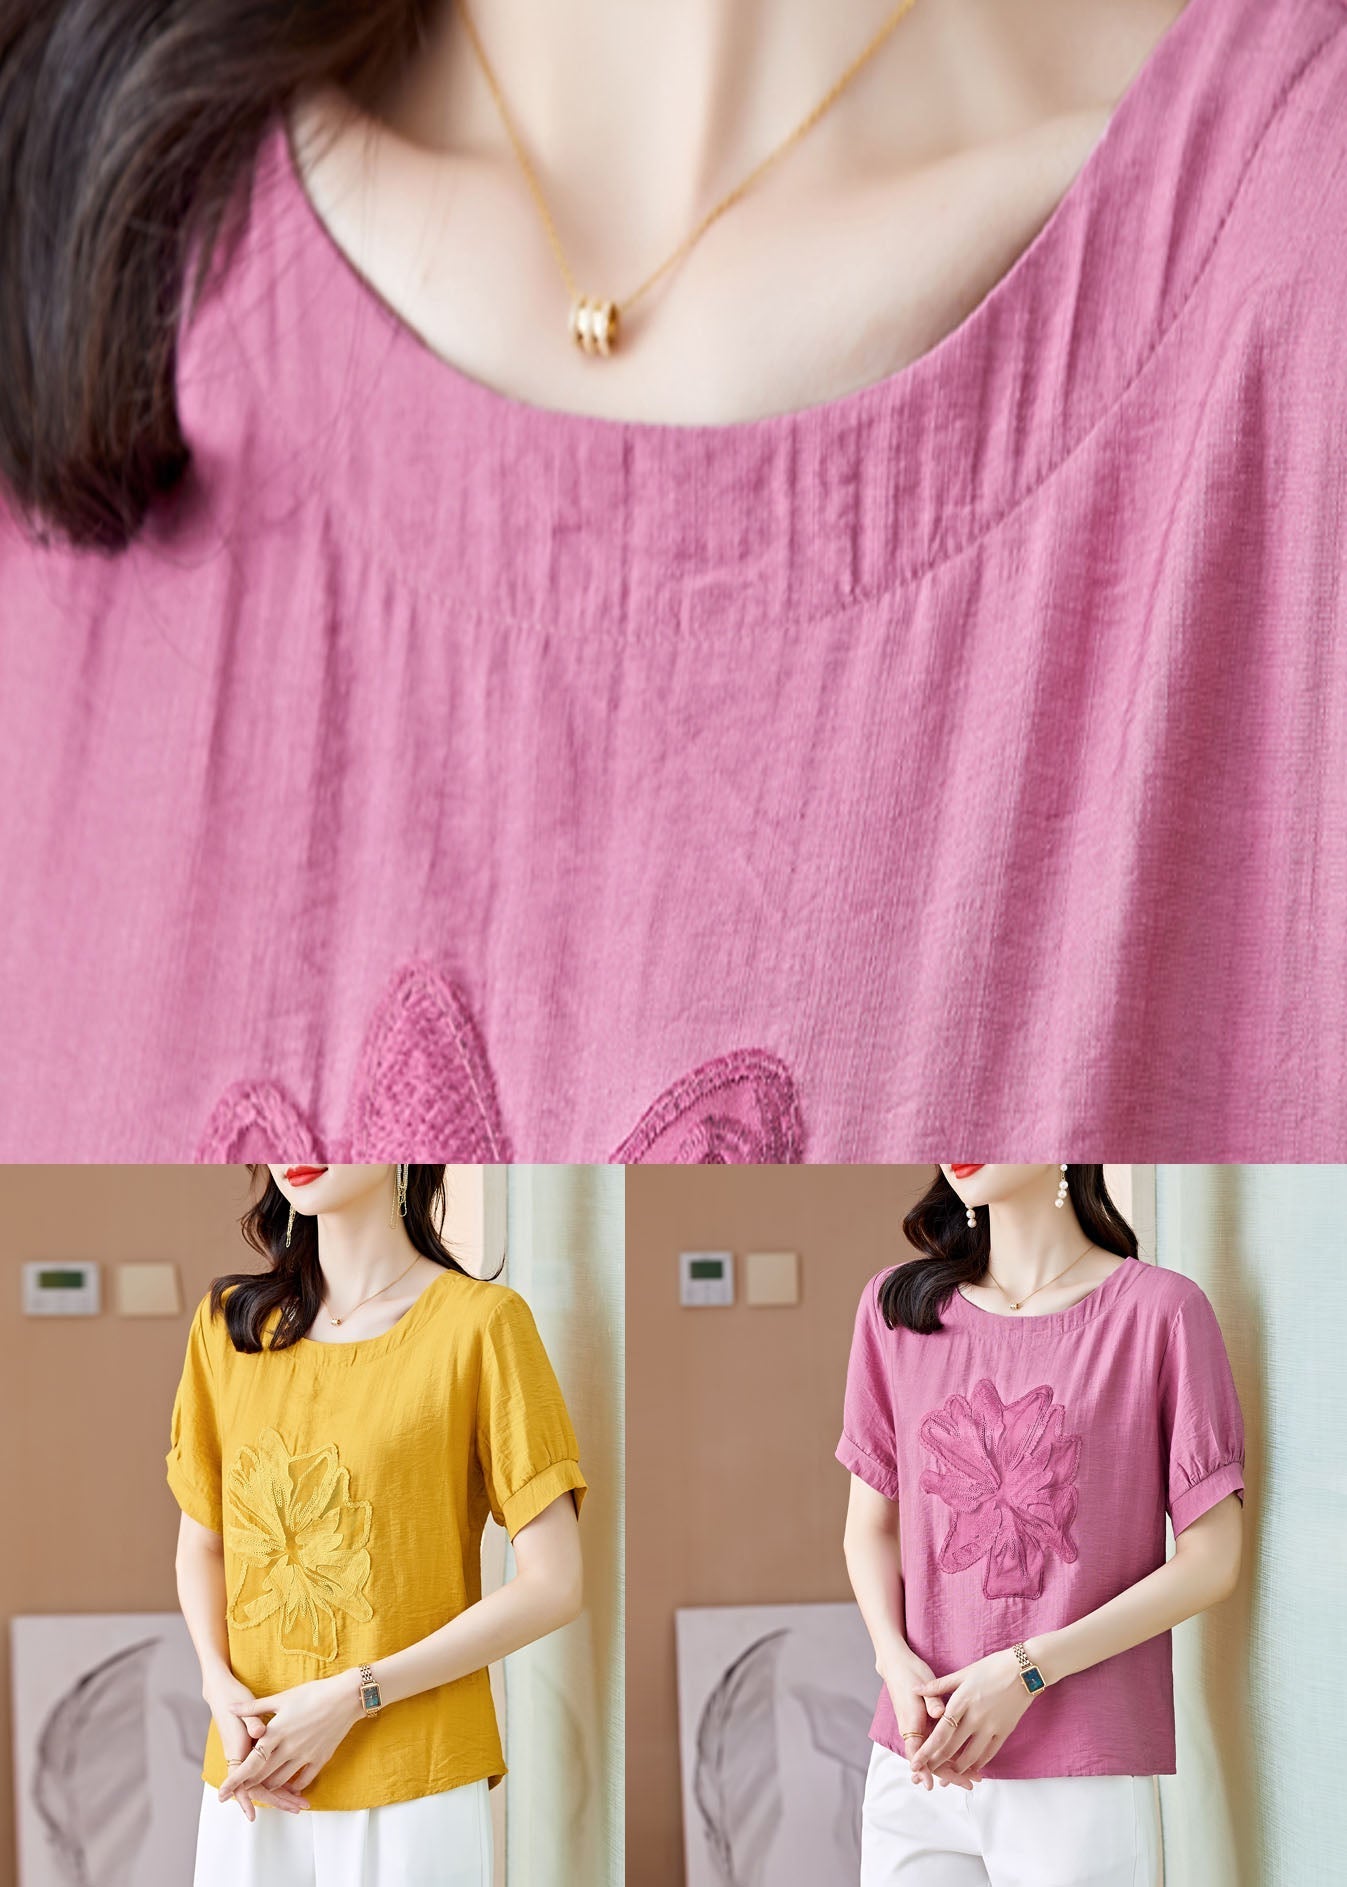 Yellow Patchwork Linen T Shirt Embroideried Wrinkled Summer LY0464